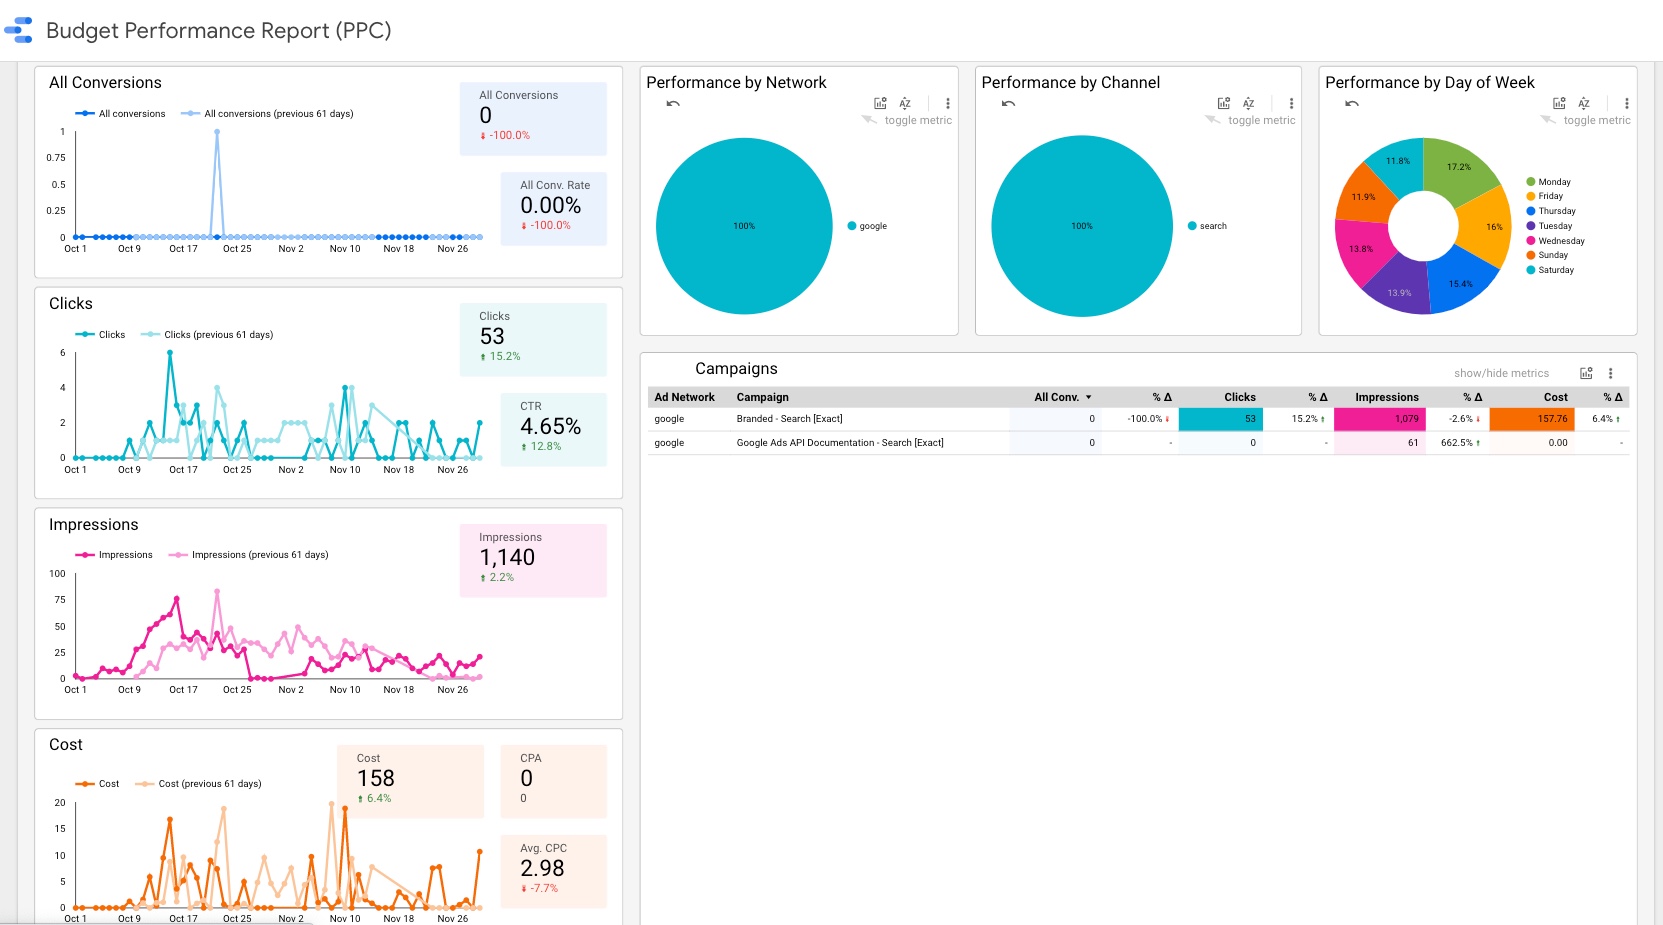 Screenshot of Shape's PPC Budget Peformance Report with live client data